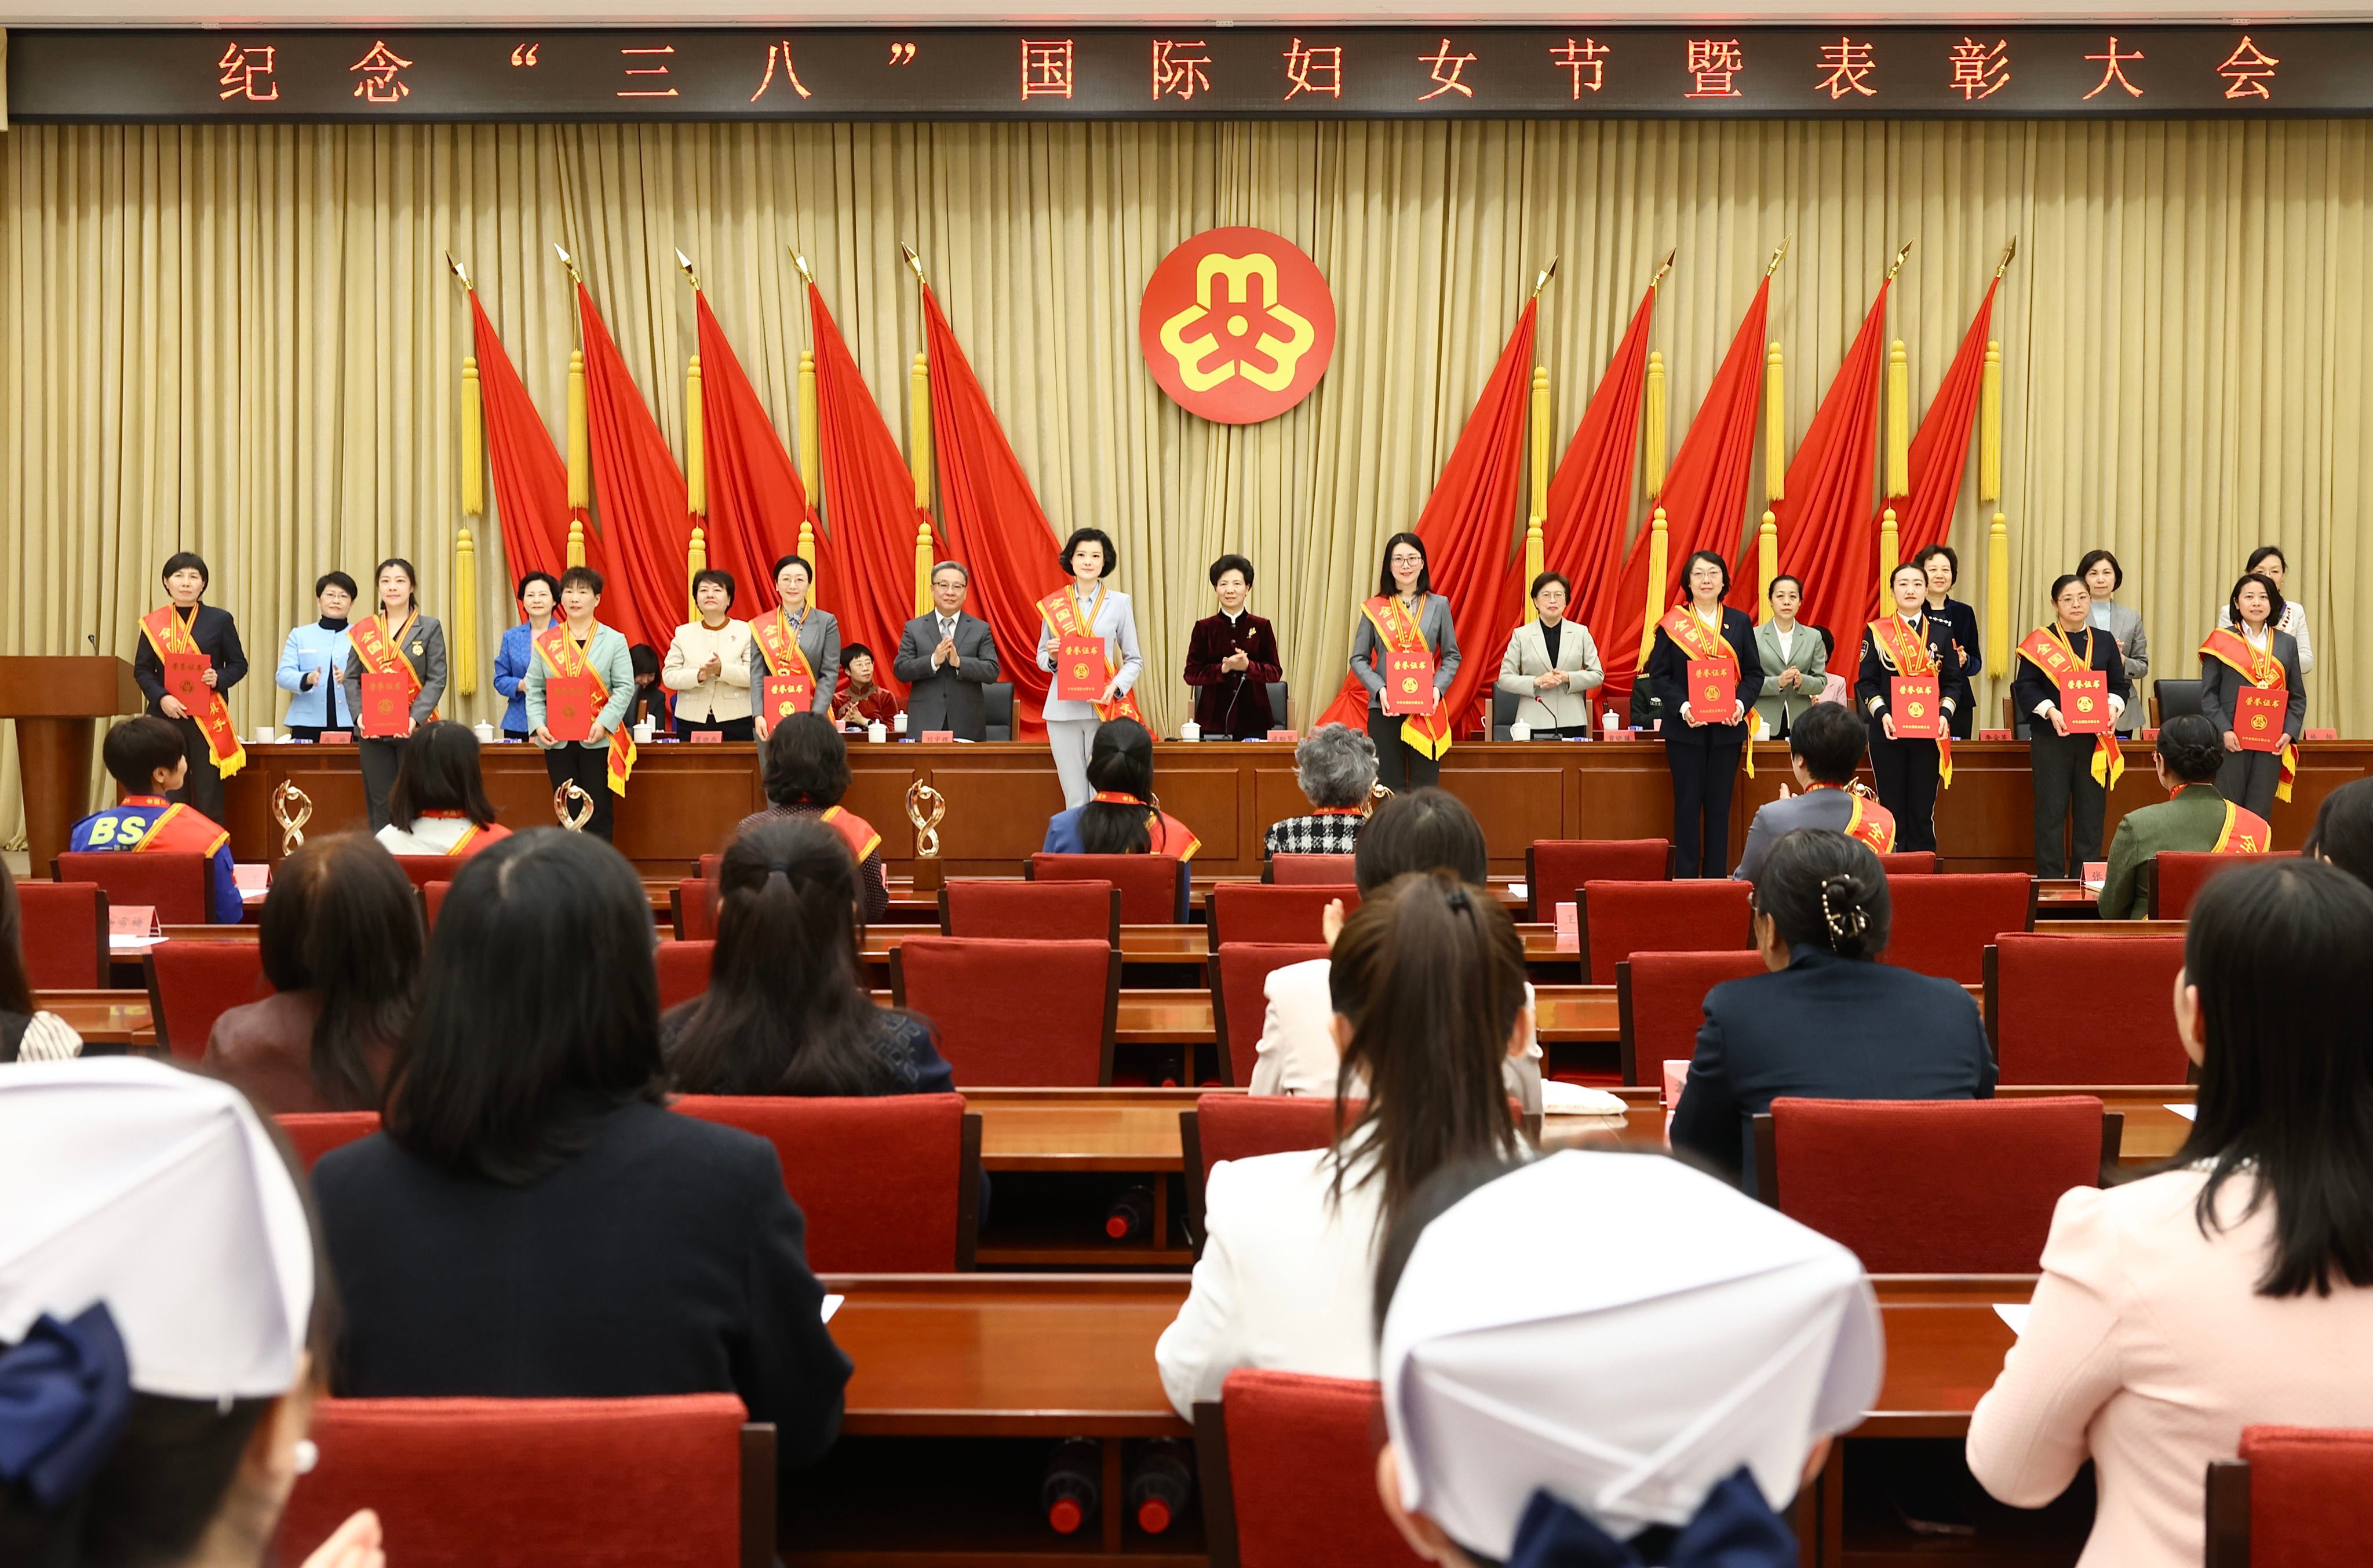 The All-China Women’s Federation holds a meeting to mark International Women’s Day and honour China’s female role models, in Beijing on March 3. Photo: Xinhua